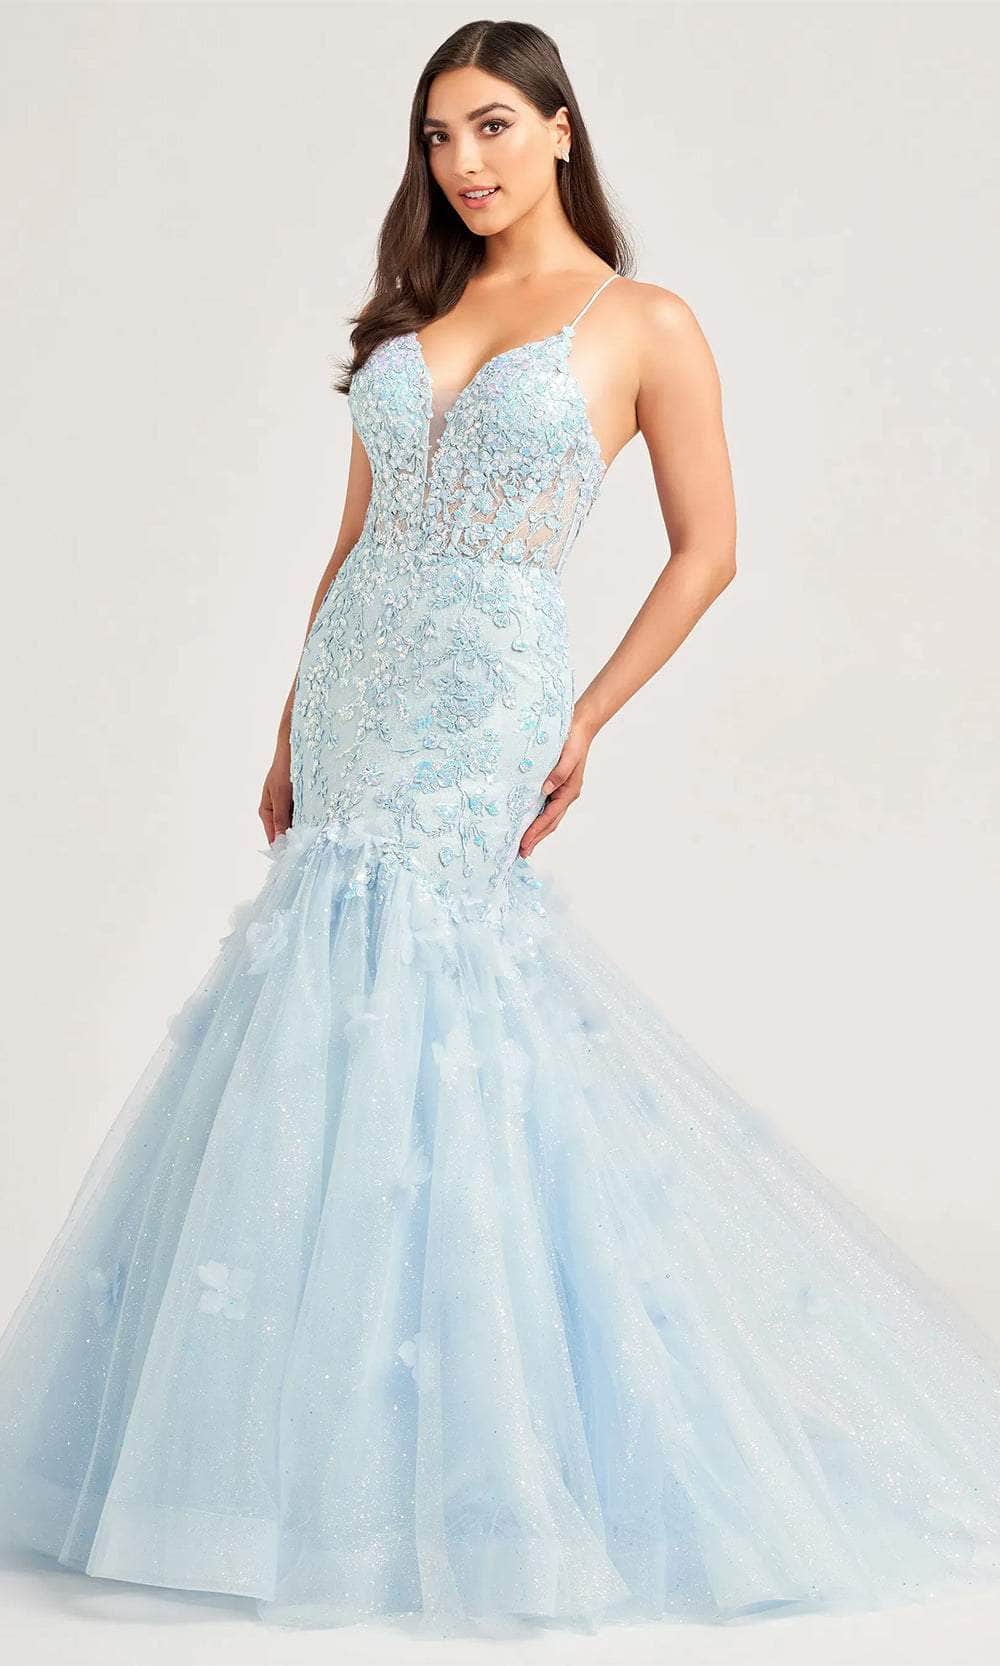 Image of Ellie Wilde EW35080 - Sparkling Embroidered Mermaid Prom Gown